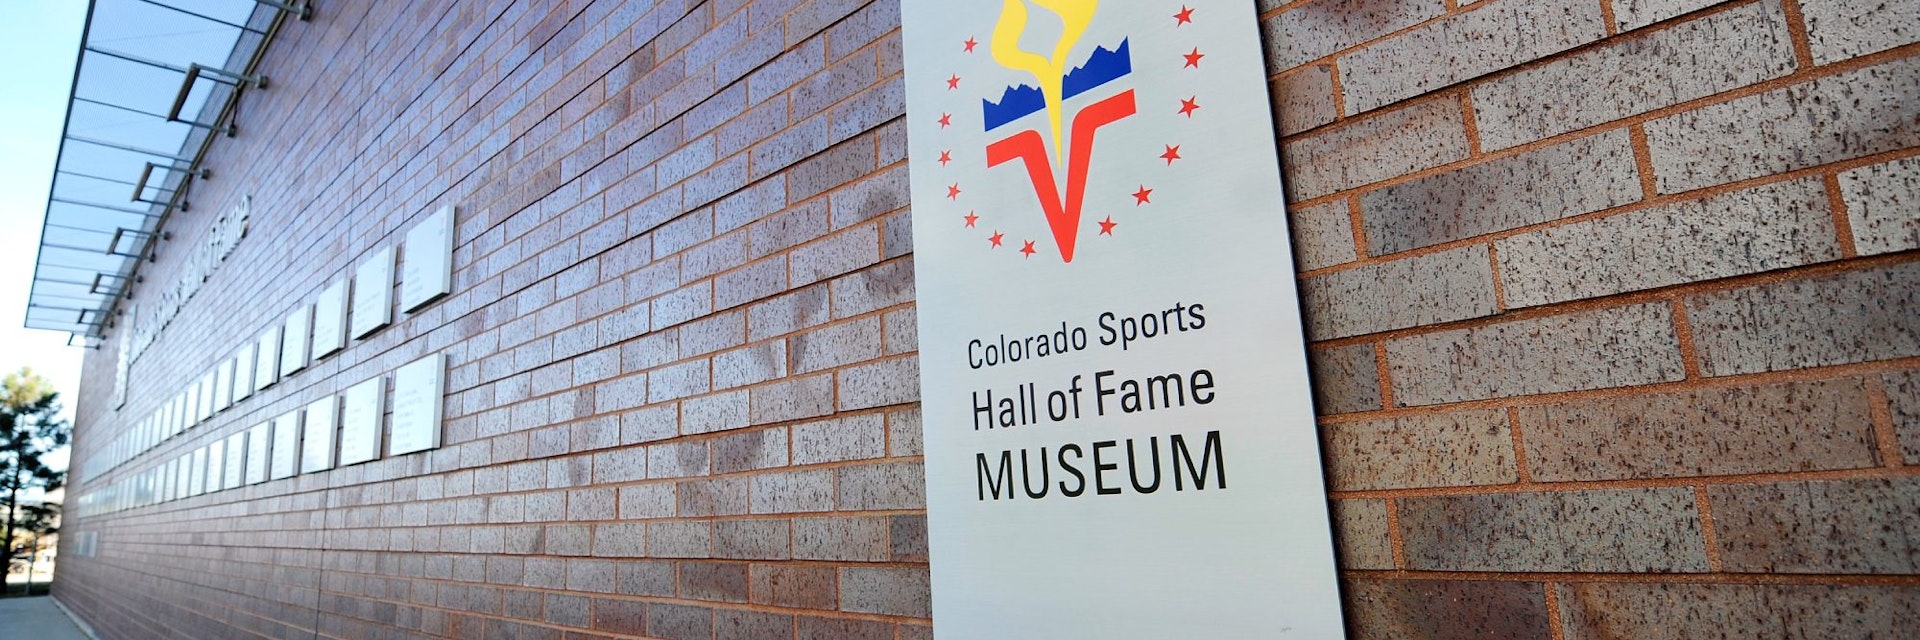 DENVER, CO - NOVEMBER 28: A sign for gate 1 of the Colorado Sports Hall of Fame Museum is seen outside the stadium before the NFL game between the Los Angeles Chargers and the Denver Broncos on November 28, 2021, at Empower Field at Mile High in Denver, Colorado. (Photo by Michael Allio/Icon Sportswire via Getty Images)